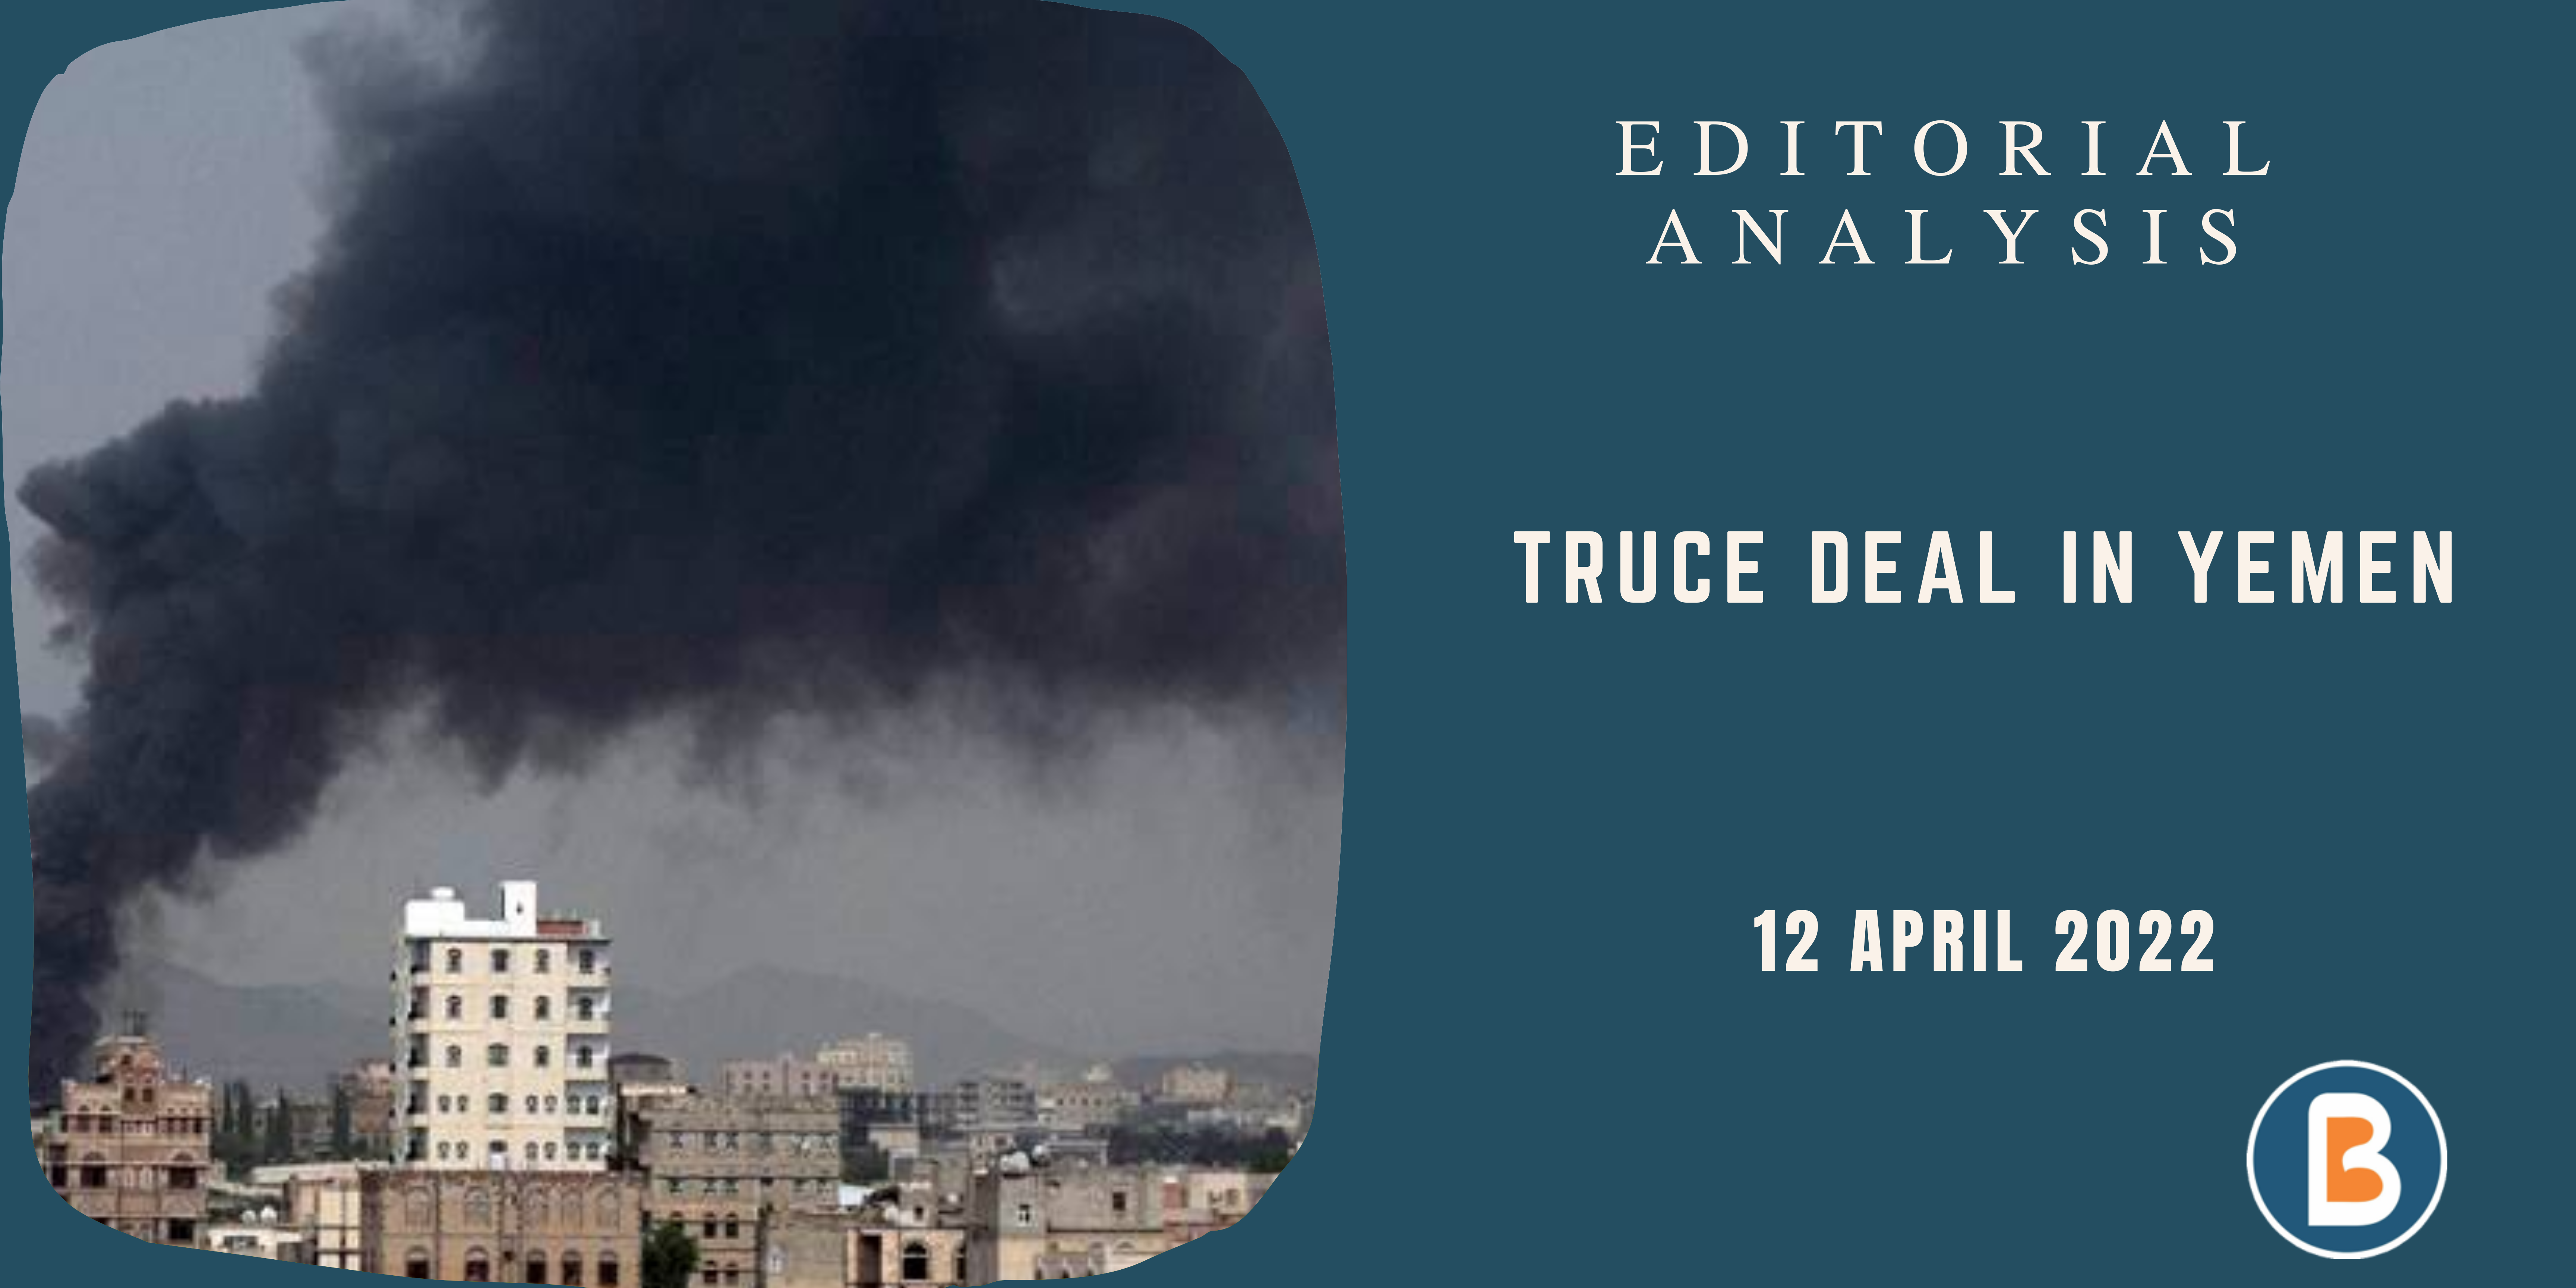 Editorial Analysis for Civil Services - Truce Deal In Yemen